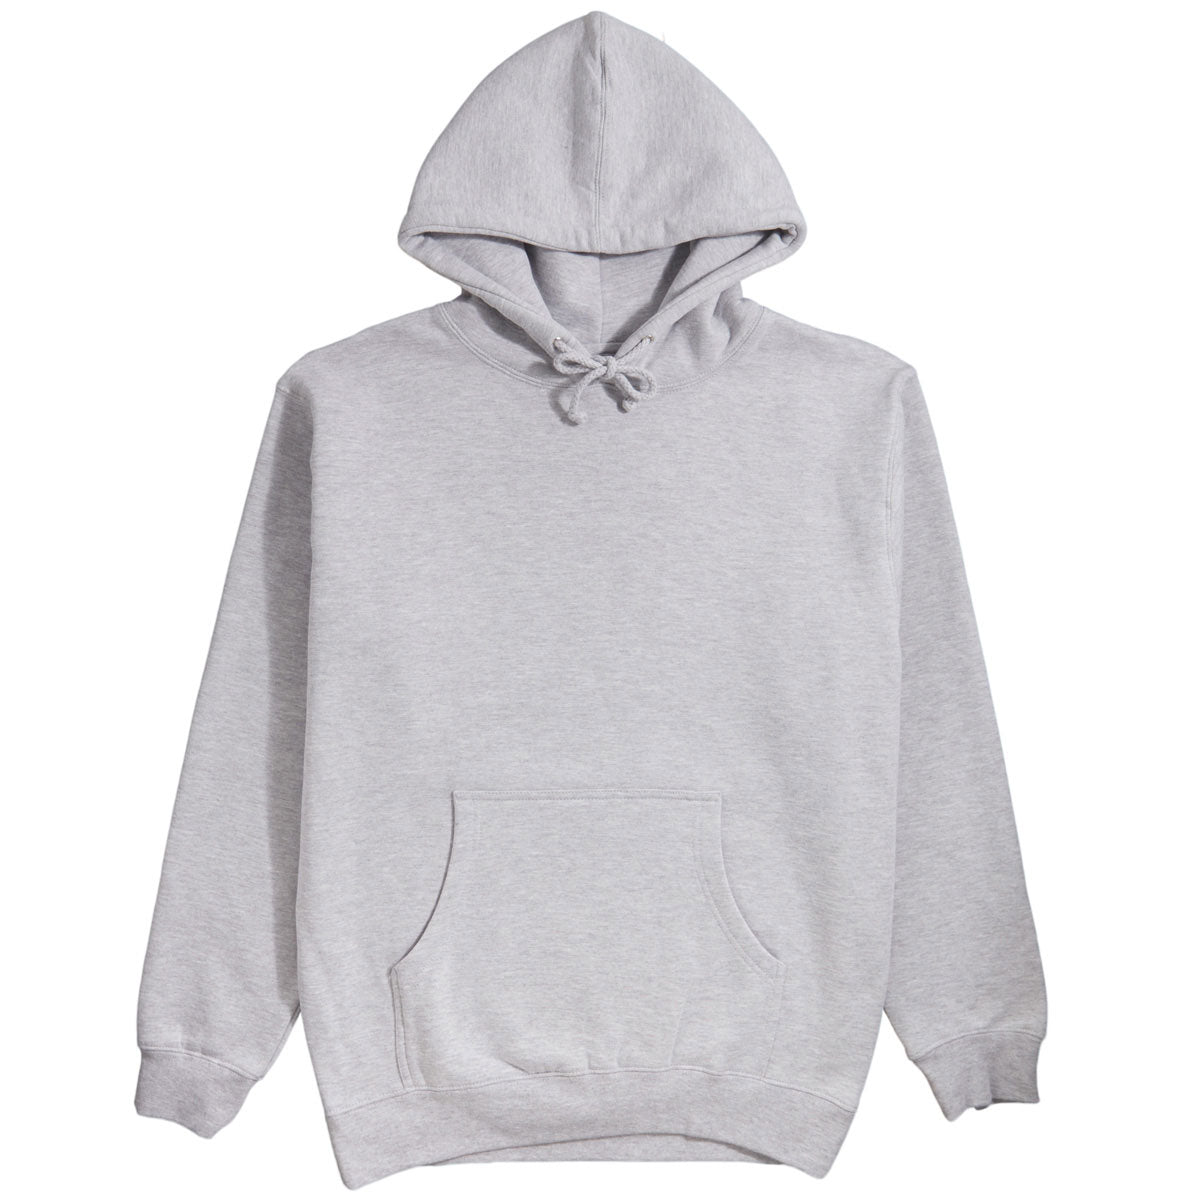 Lucas Beaufort Color-Up Customs X Pullover Hoodie image 3